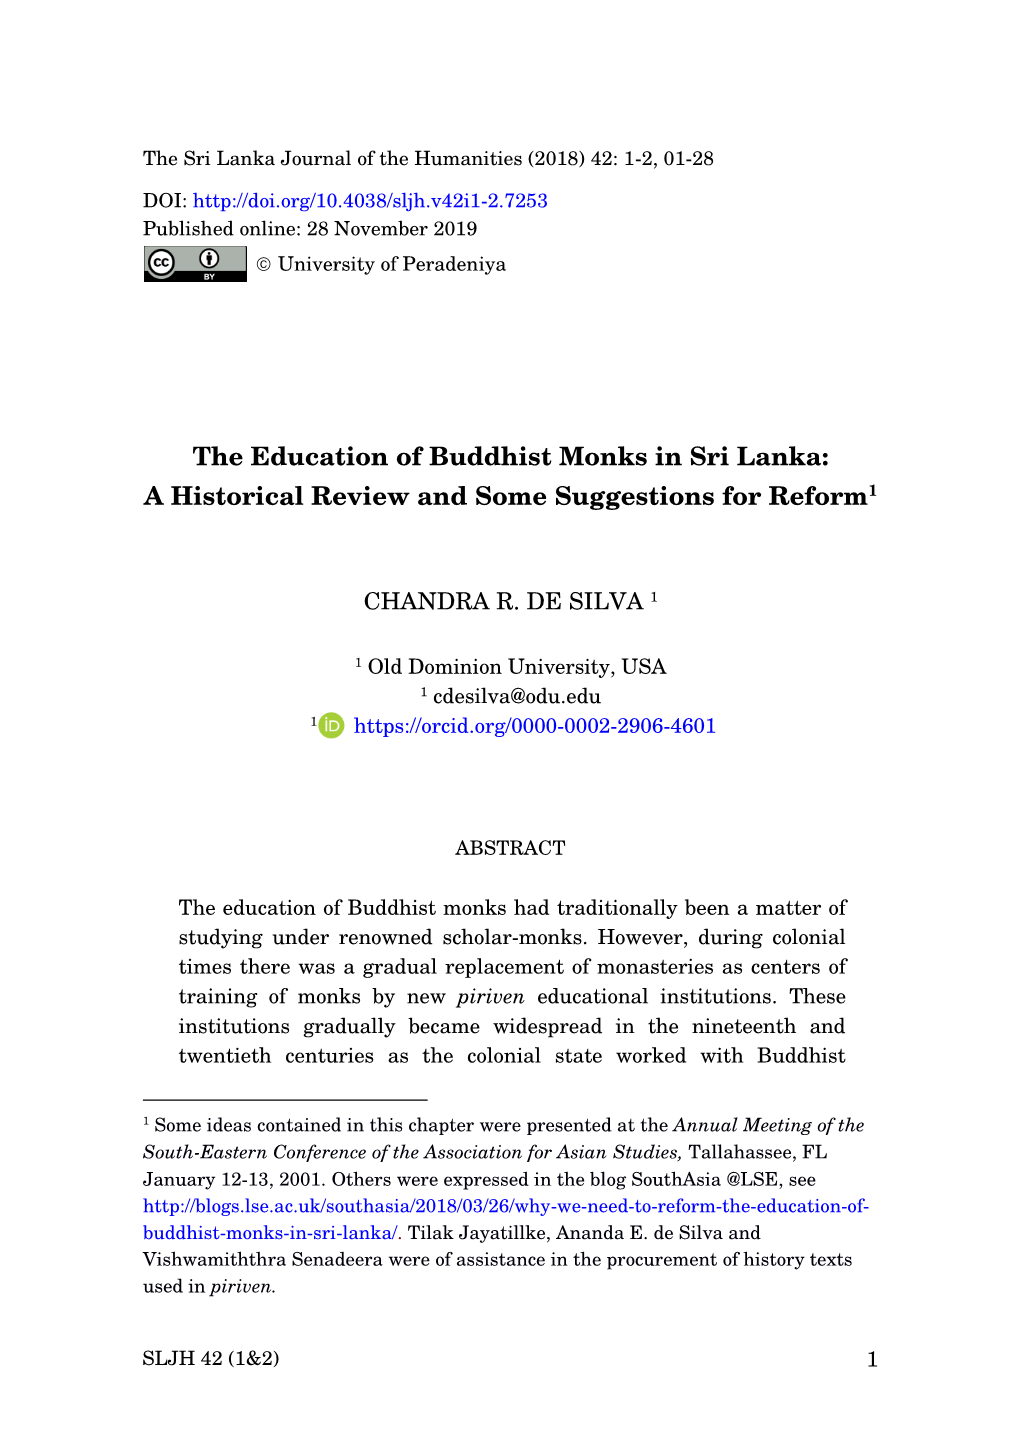 The Education of Buddhist Monks in Sri Lanka: a Historical Review and Some Suggestions for Reform1